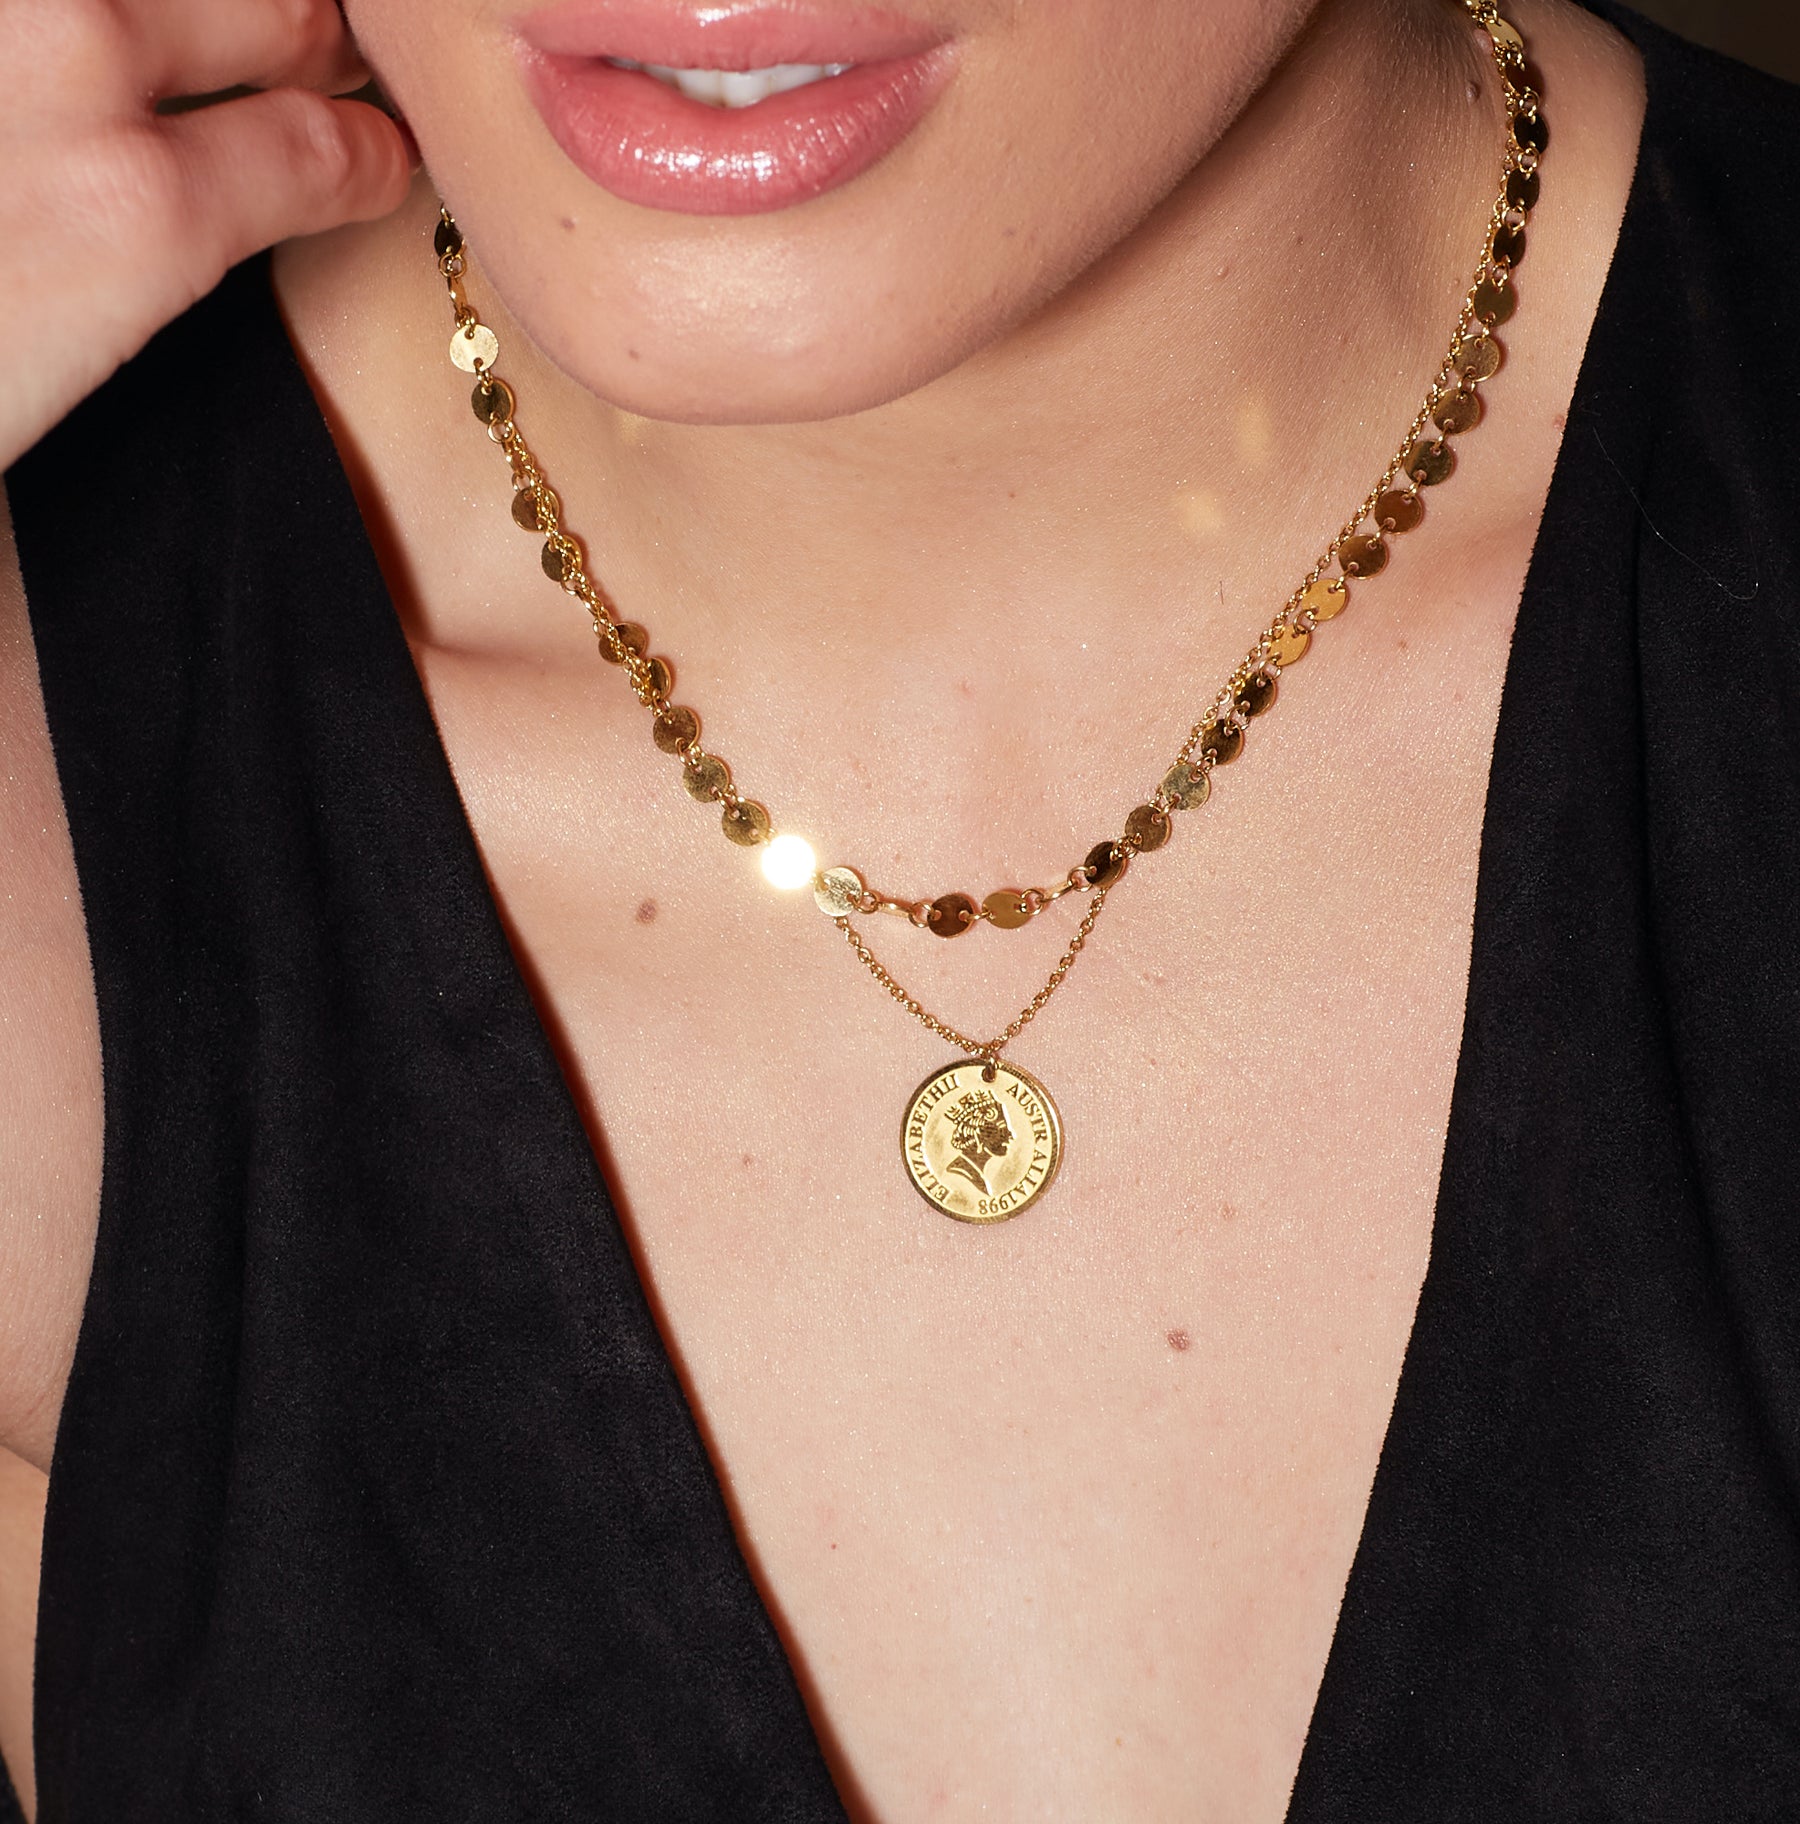 UK's Top Brand for Gold Plated Personalised Jewellery – Trendyz